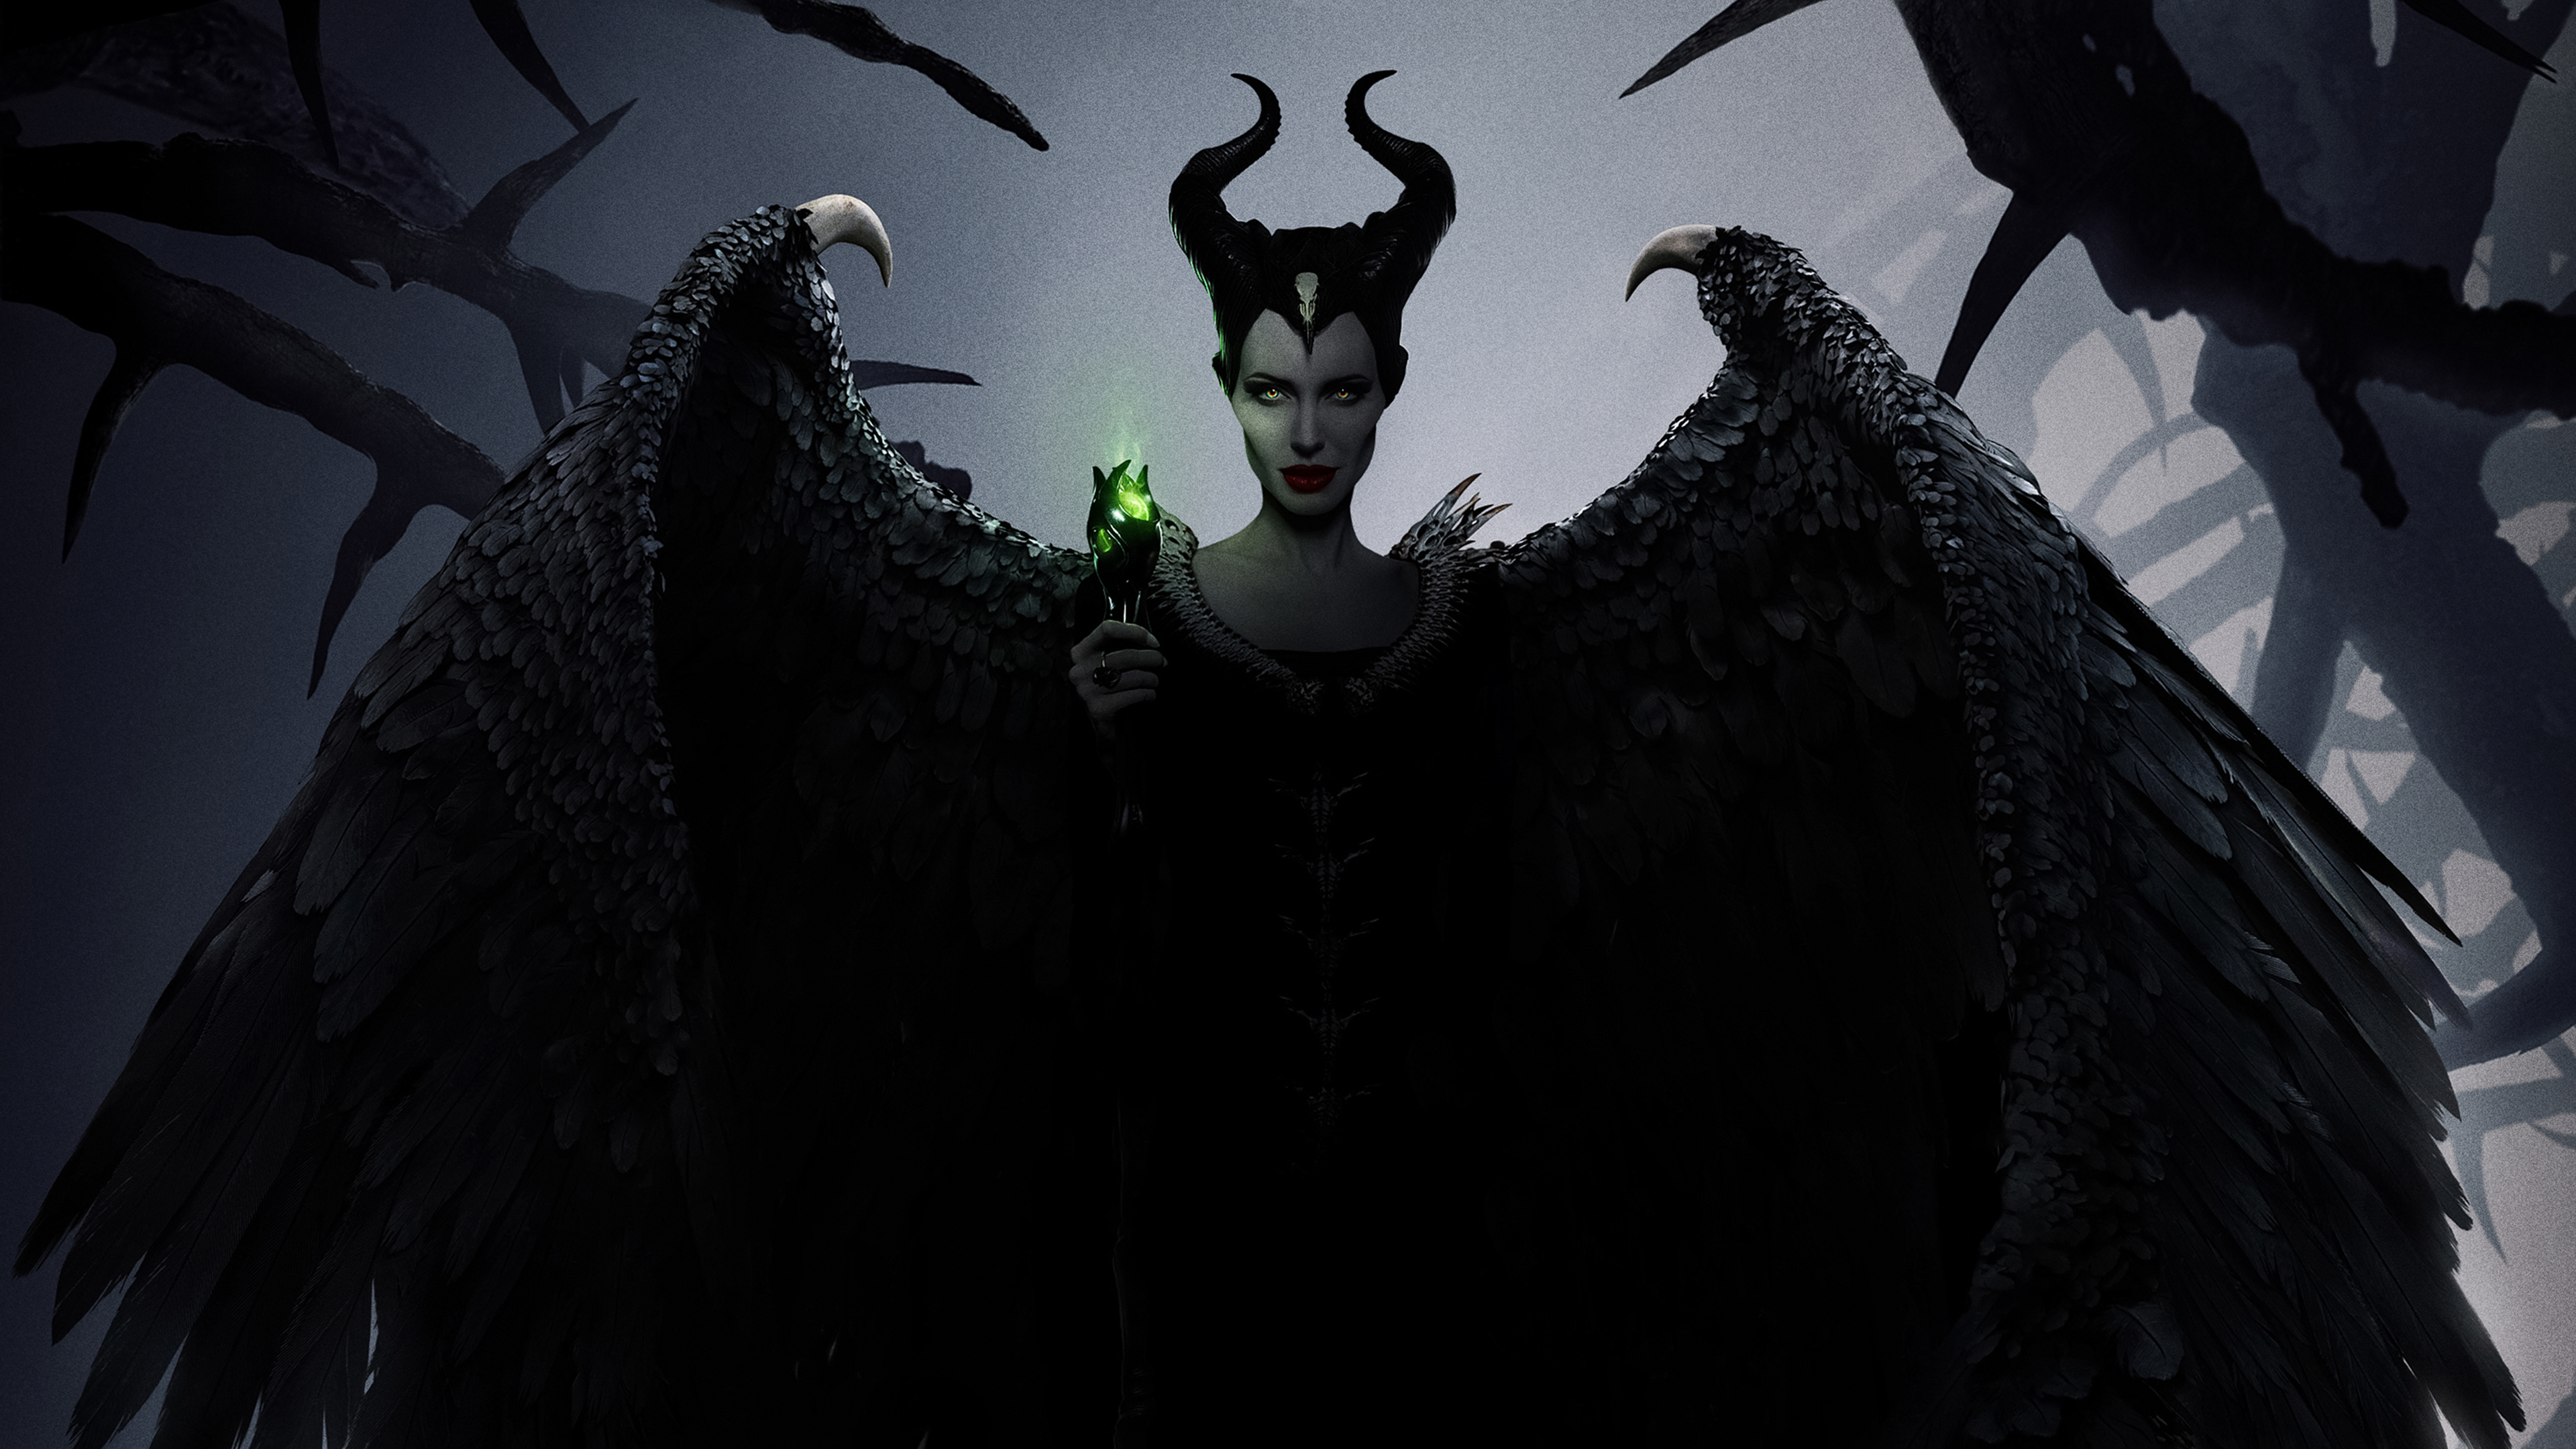 People 3840x2160 Angelina Jolie Maleficent mistress of evil Black wings actress movies